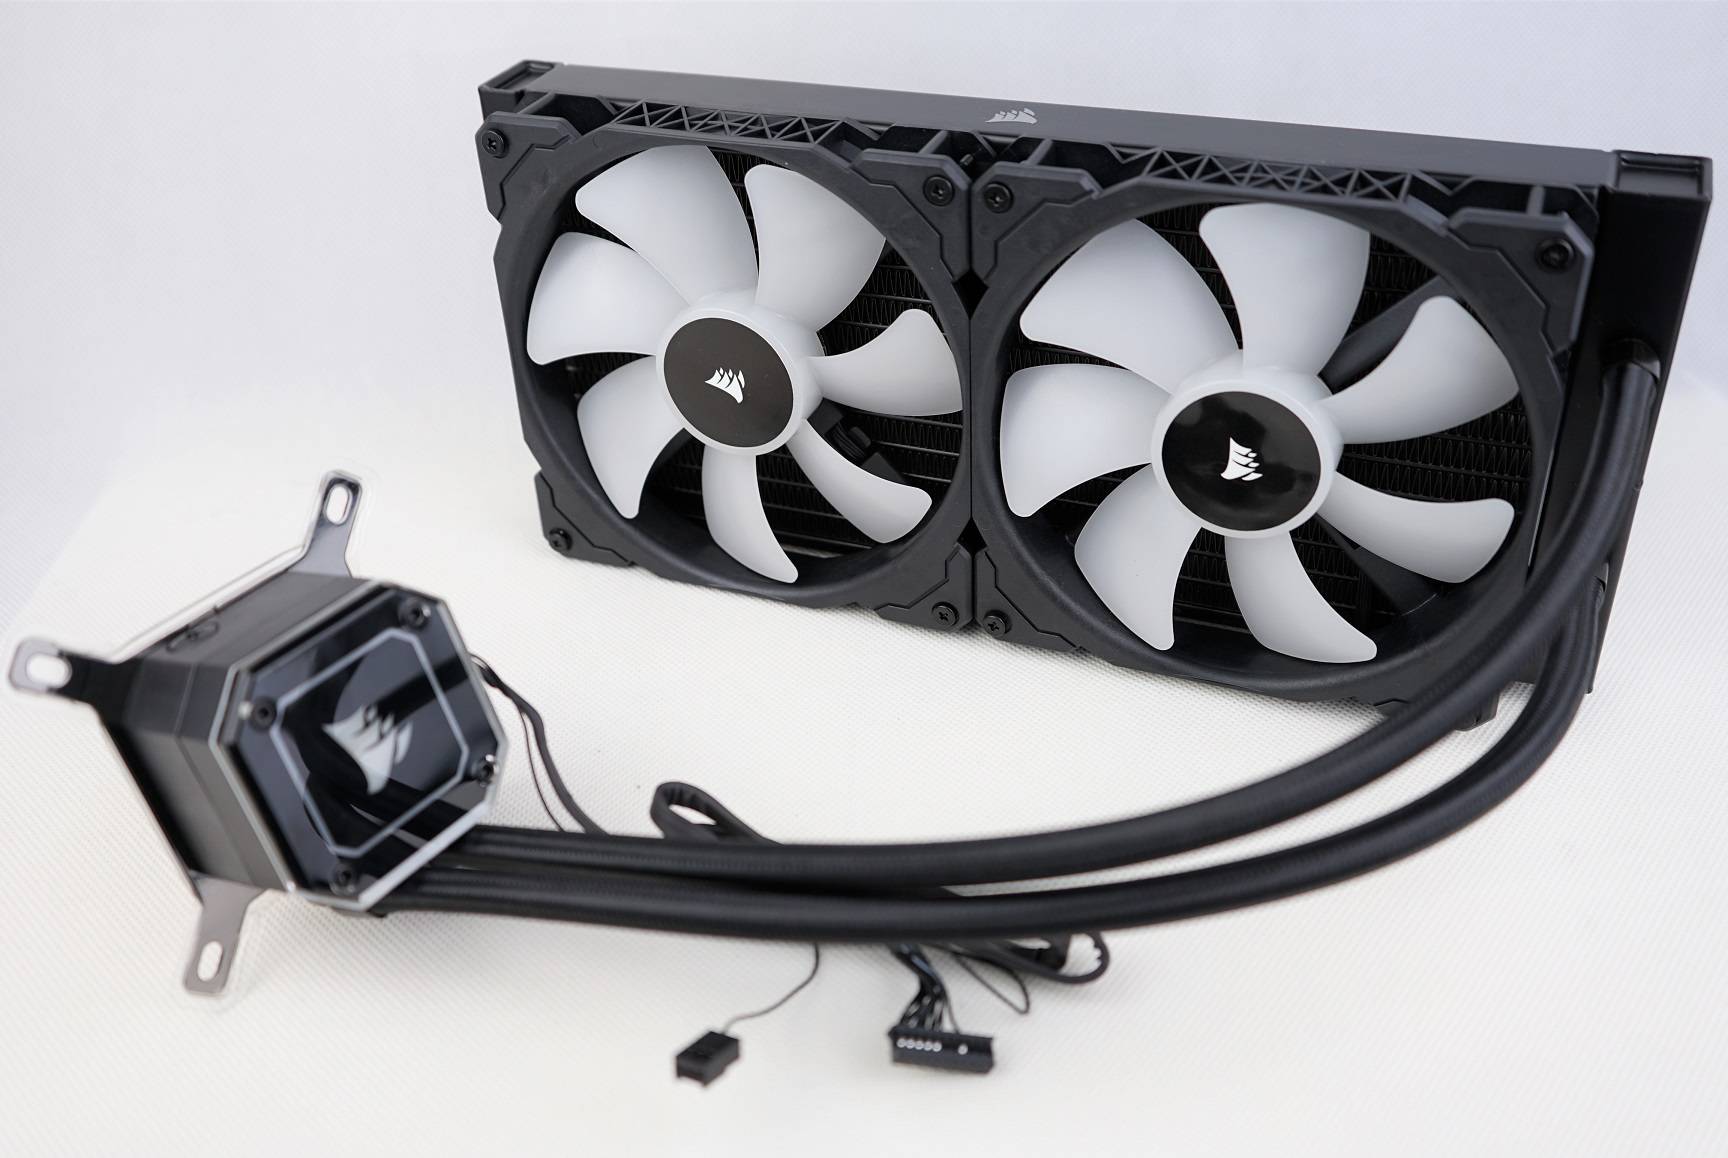 Unboxing and of Corsair iCUE H115i ELITE CAPELLIX AIO CPU Cooler | UnbxTech